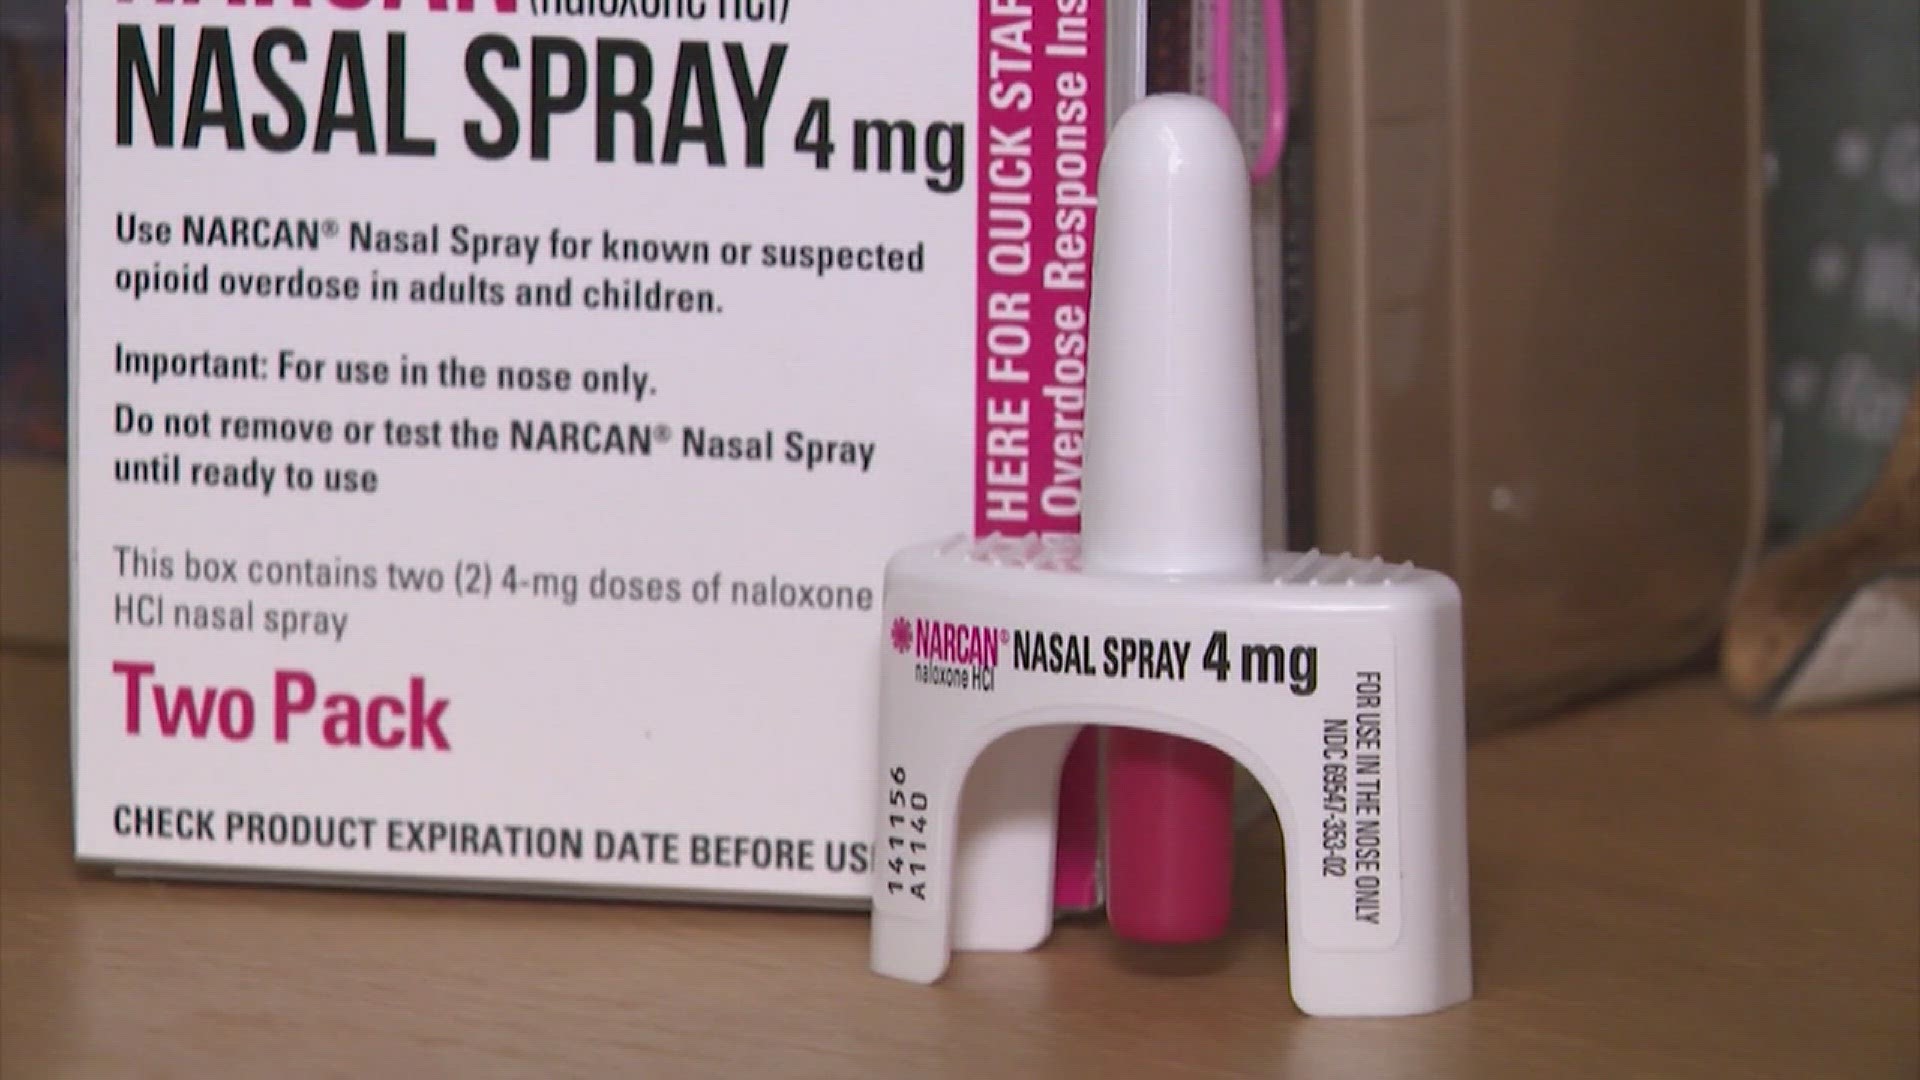 The nasal spray can reverse an Opioid overdose in minutes. Even the smallest dose of Fentanyl can be deadly.